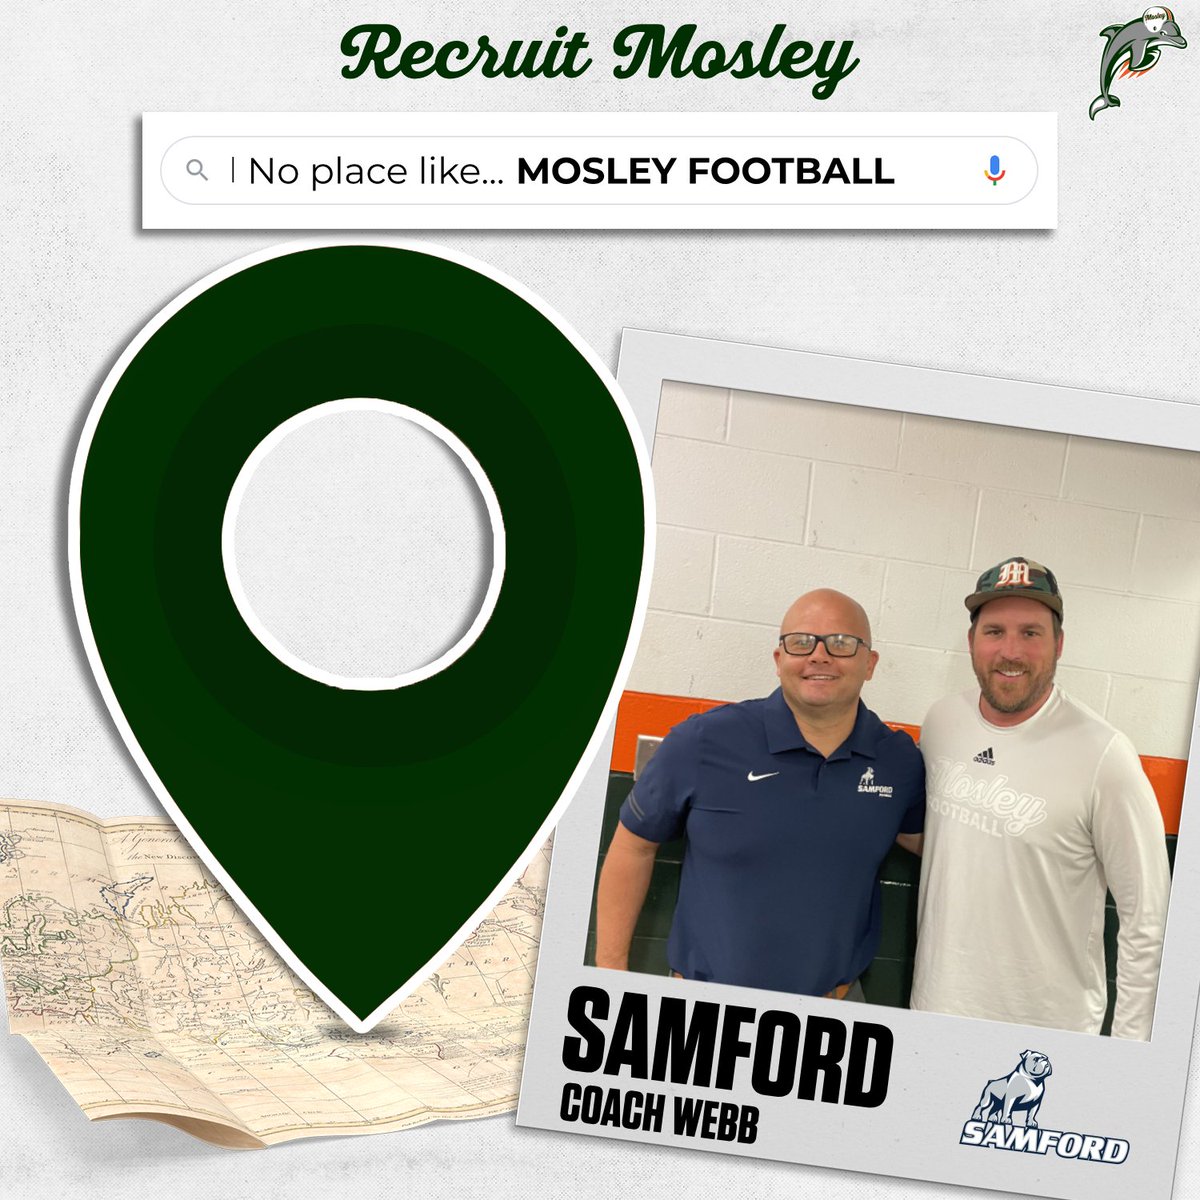 Thank you to @Coach_kwebb from @SamfordFootball for stopping by to see our players at Mosley Football #MosleyMade